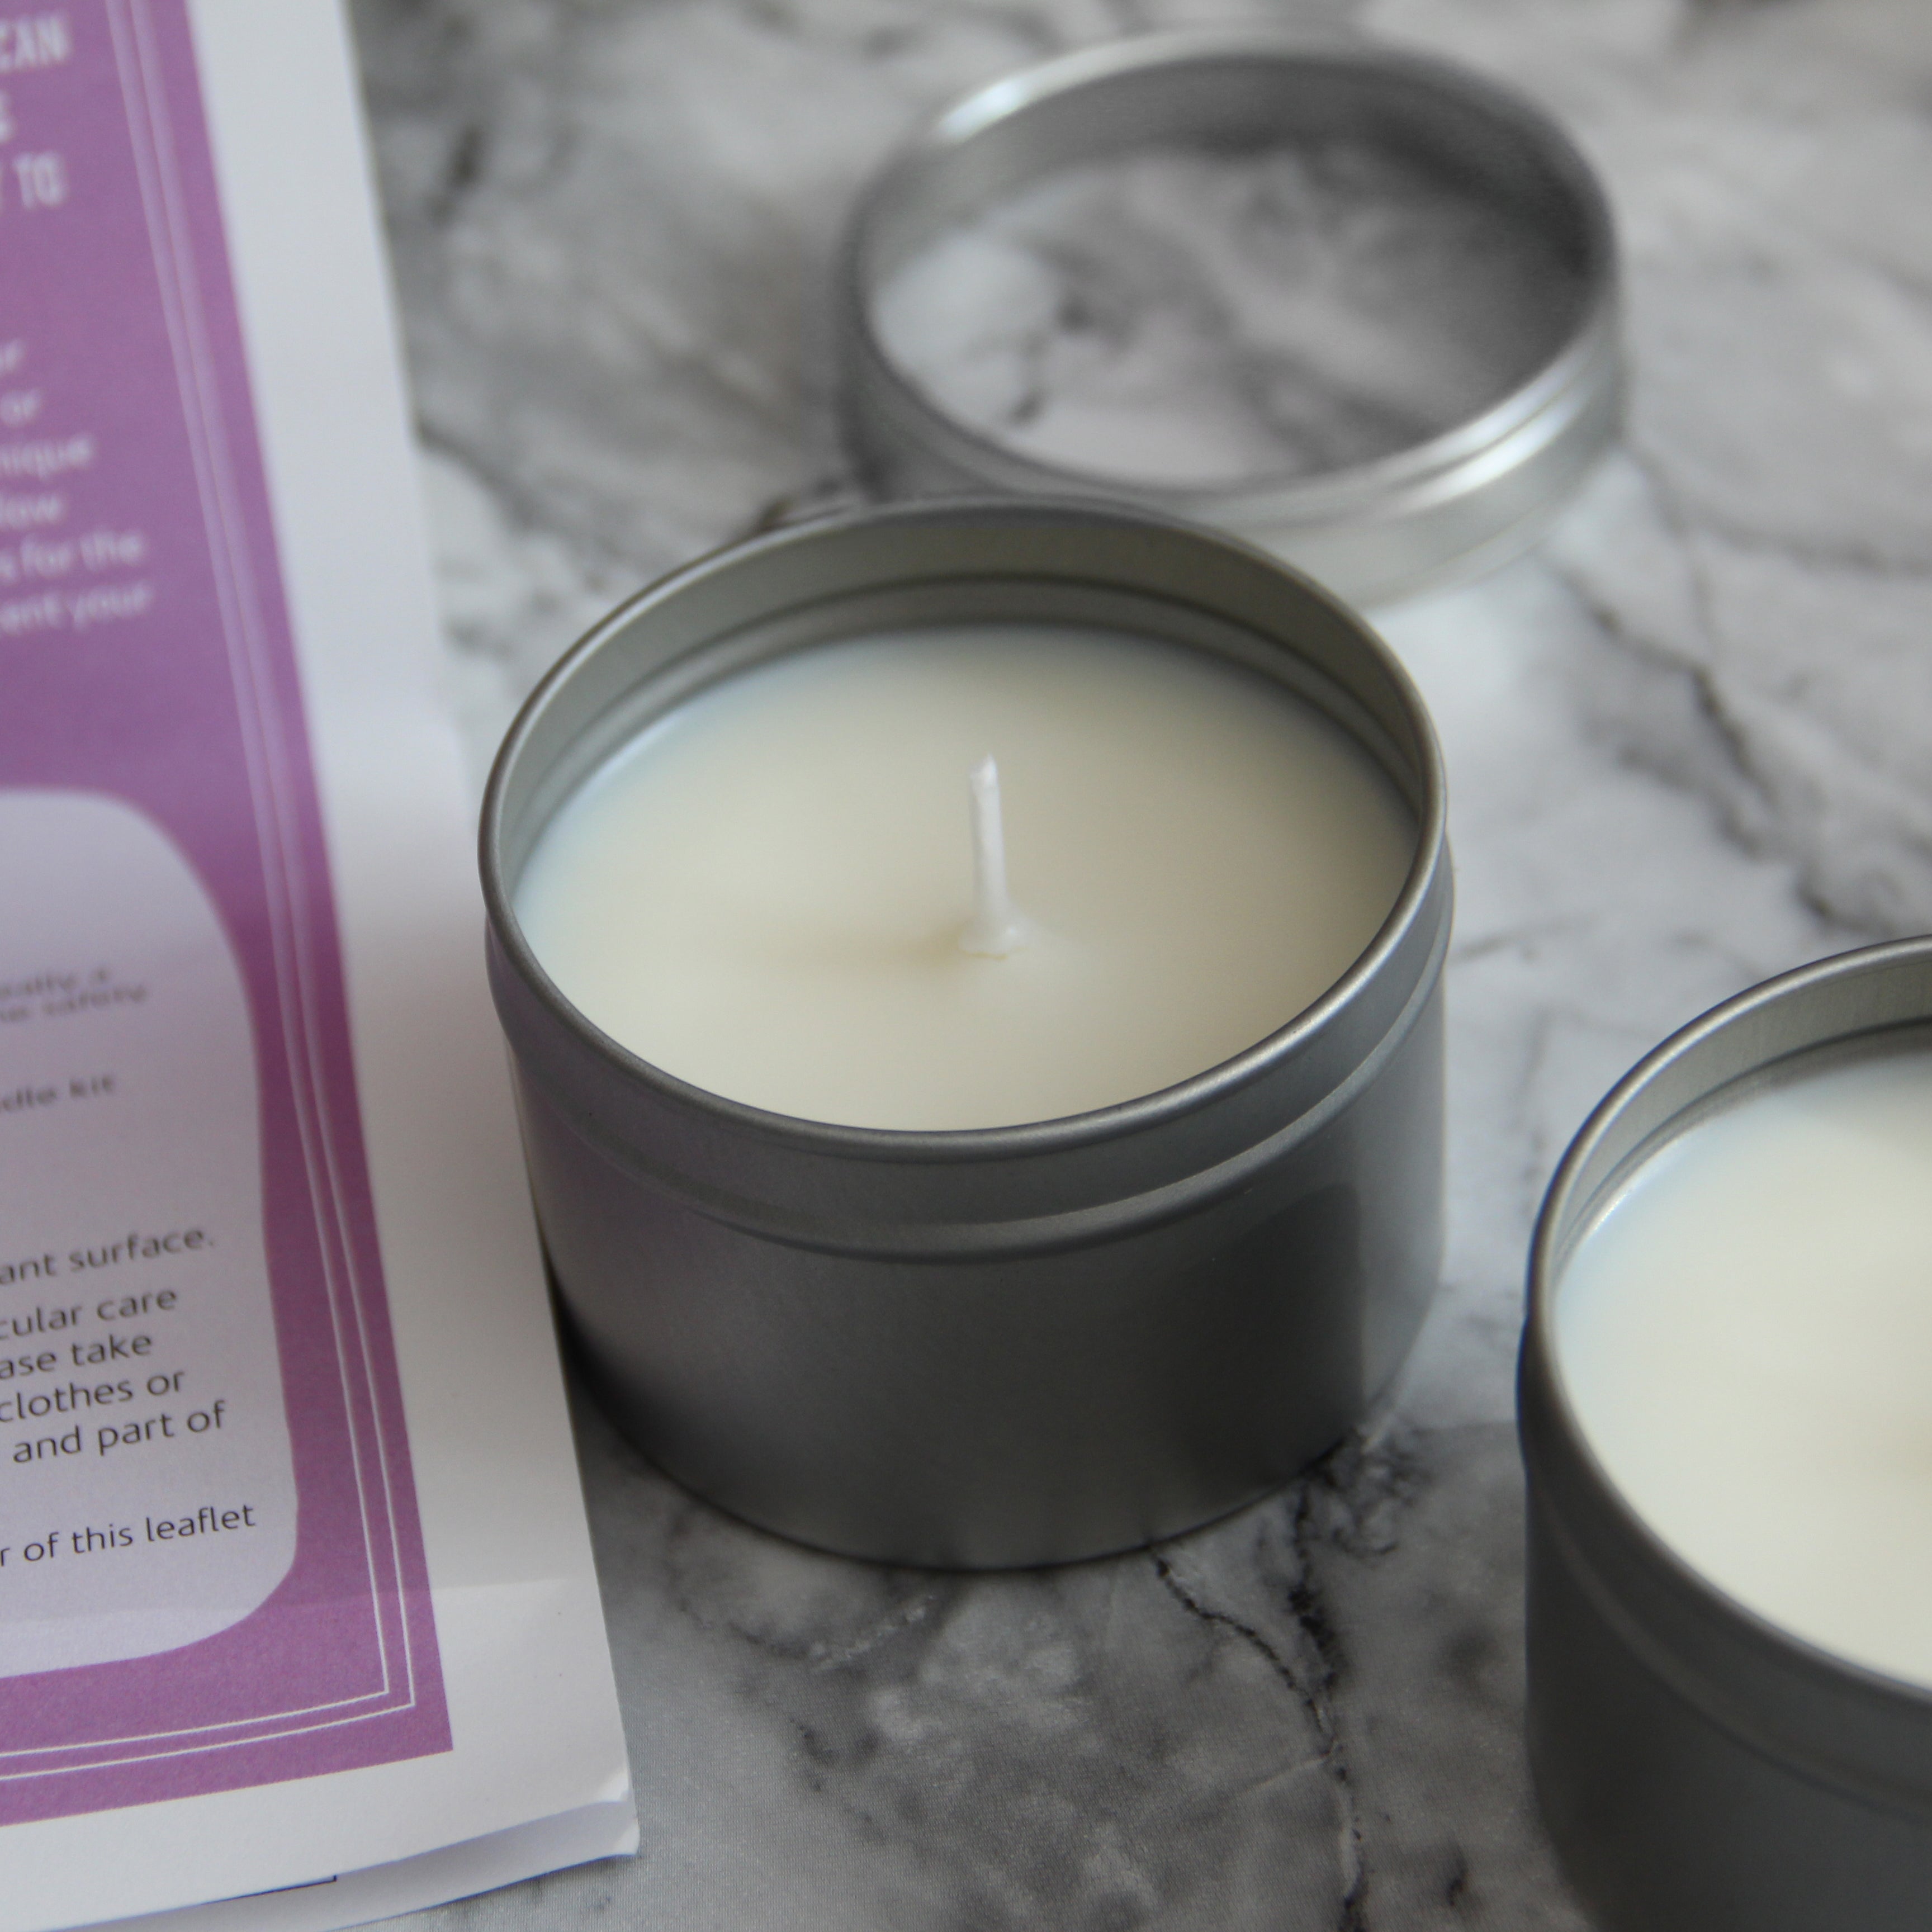 Best Homemade Candle Recipe To Try on Your Own – Northumbrian Candleworks